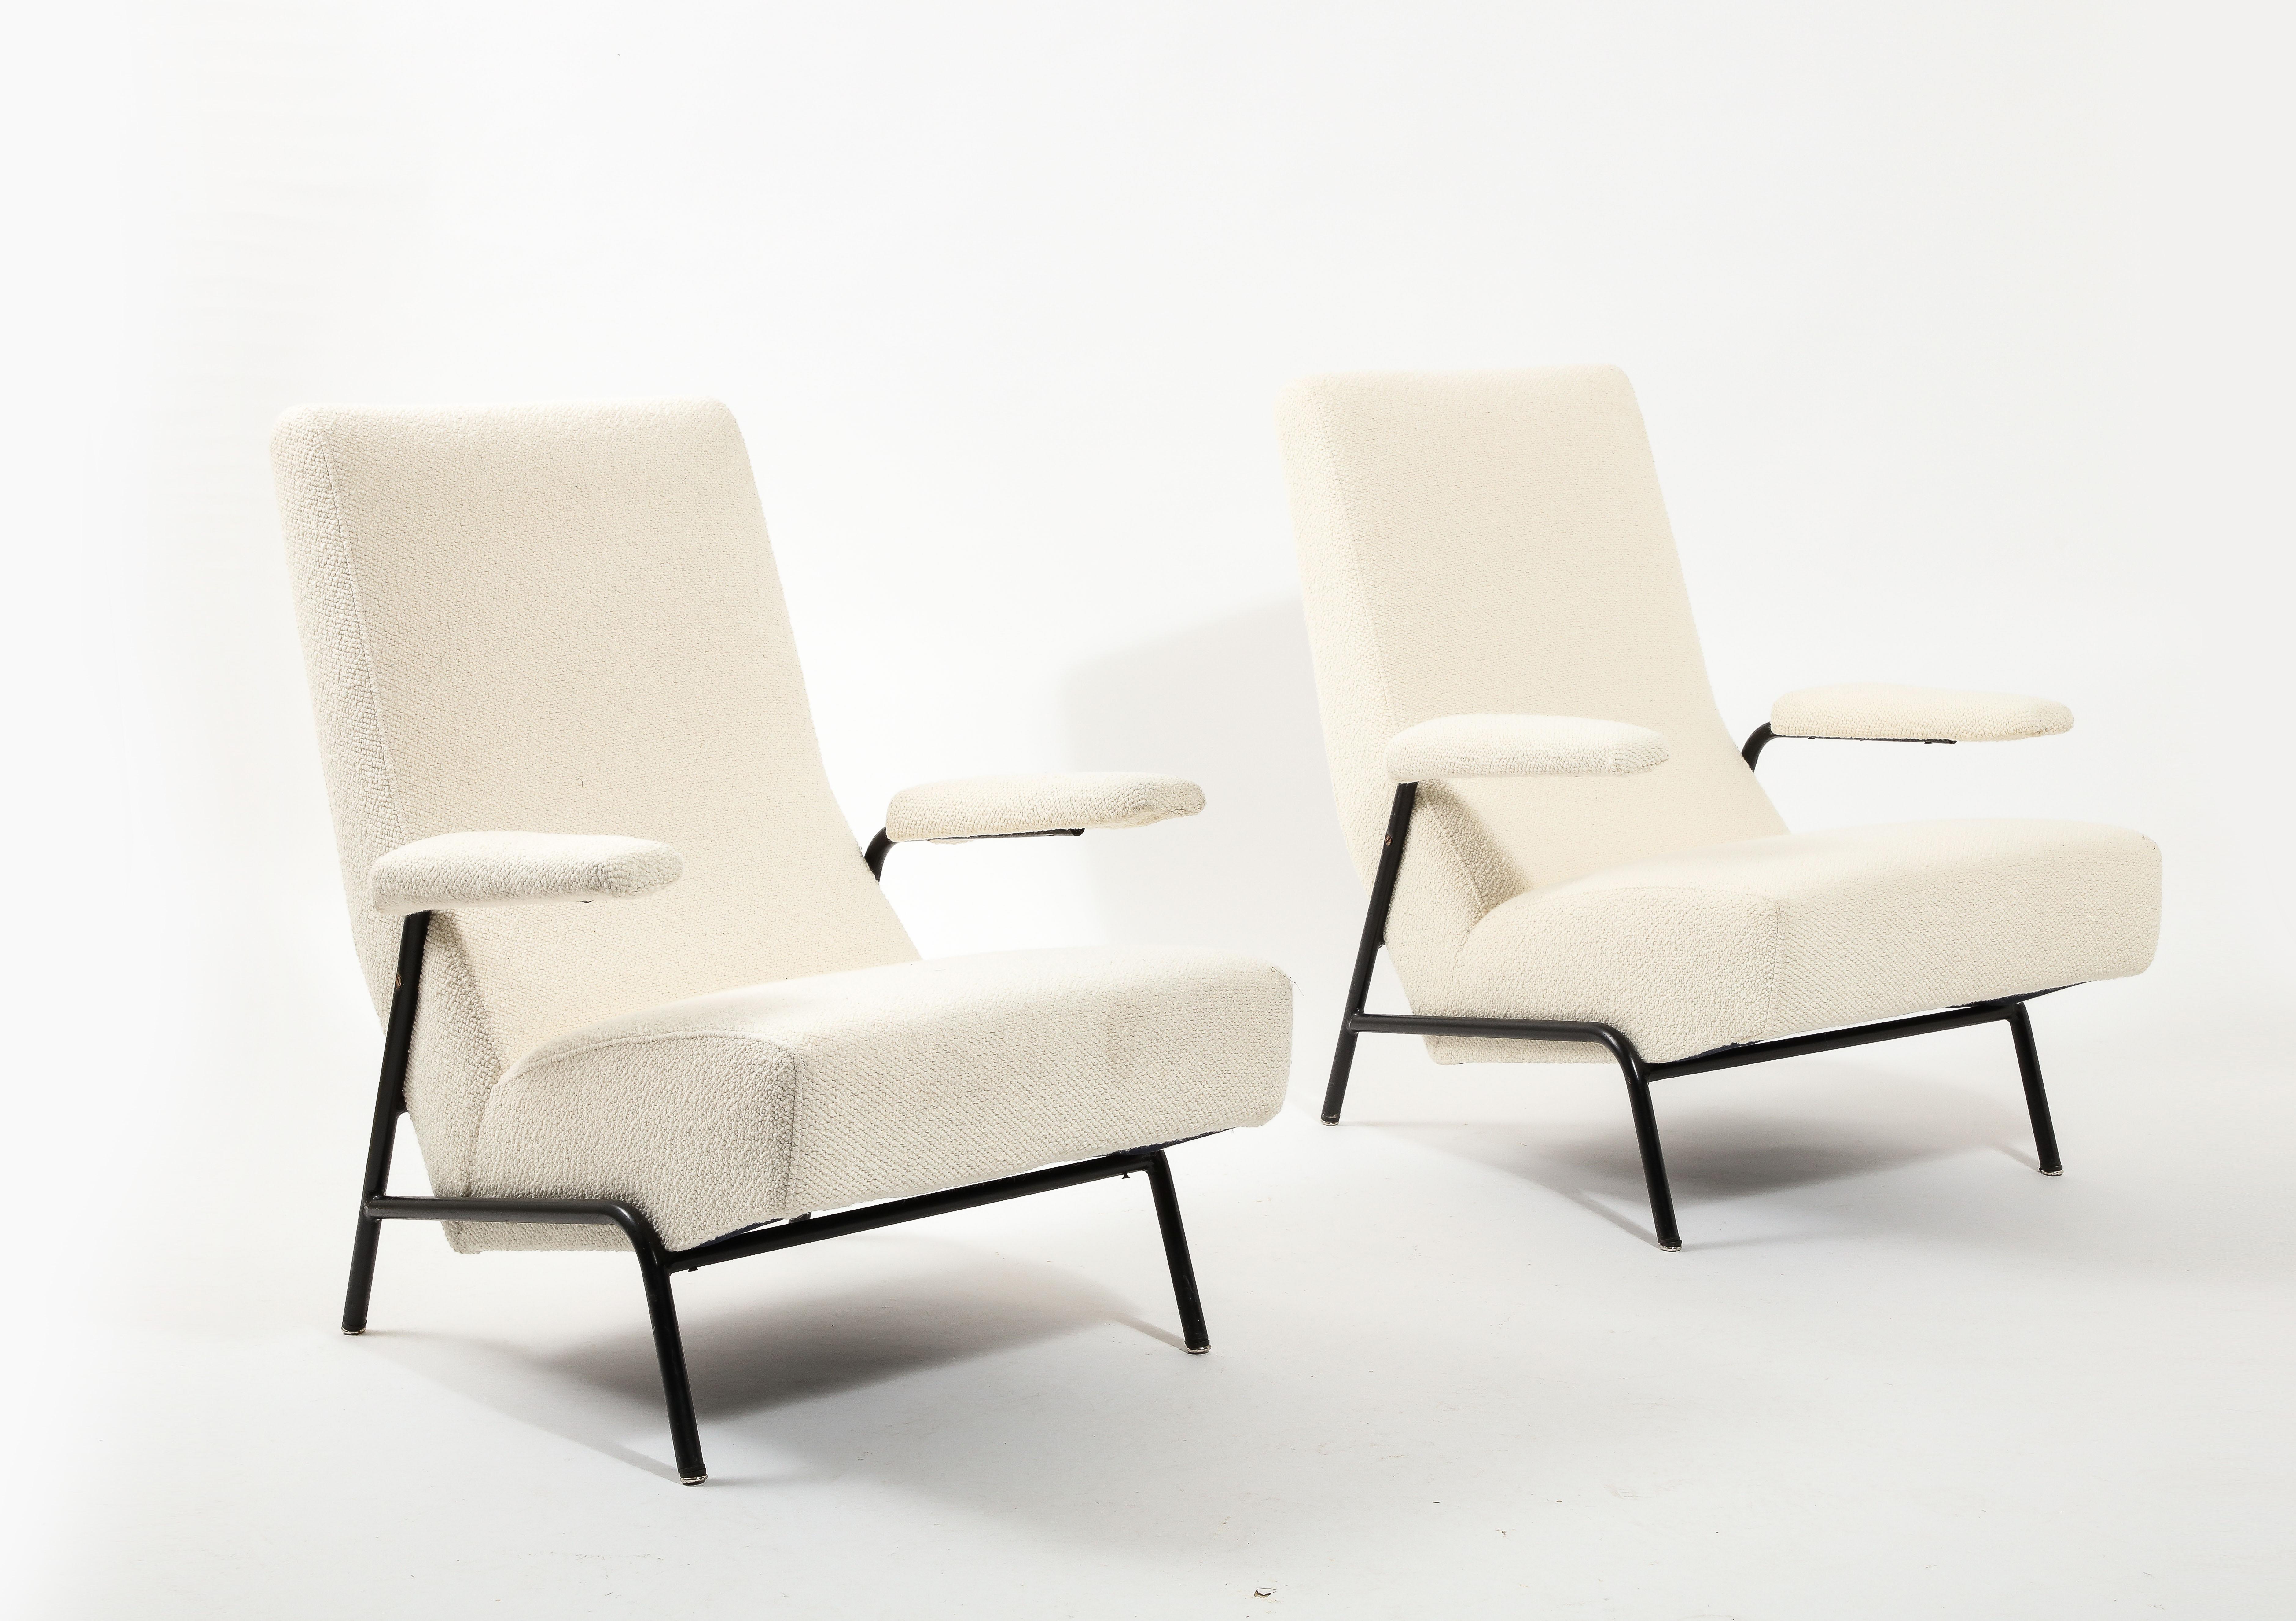 Pair of Guy Besnard armchairs on an enameled steel base, newly reupholstered in bouclé.